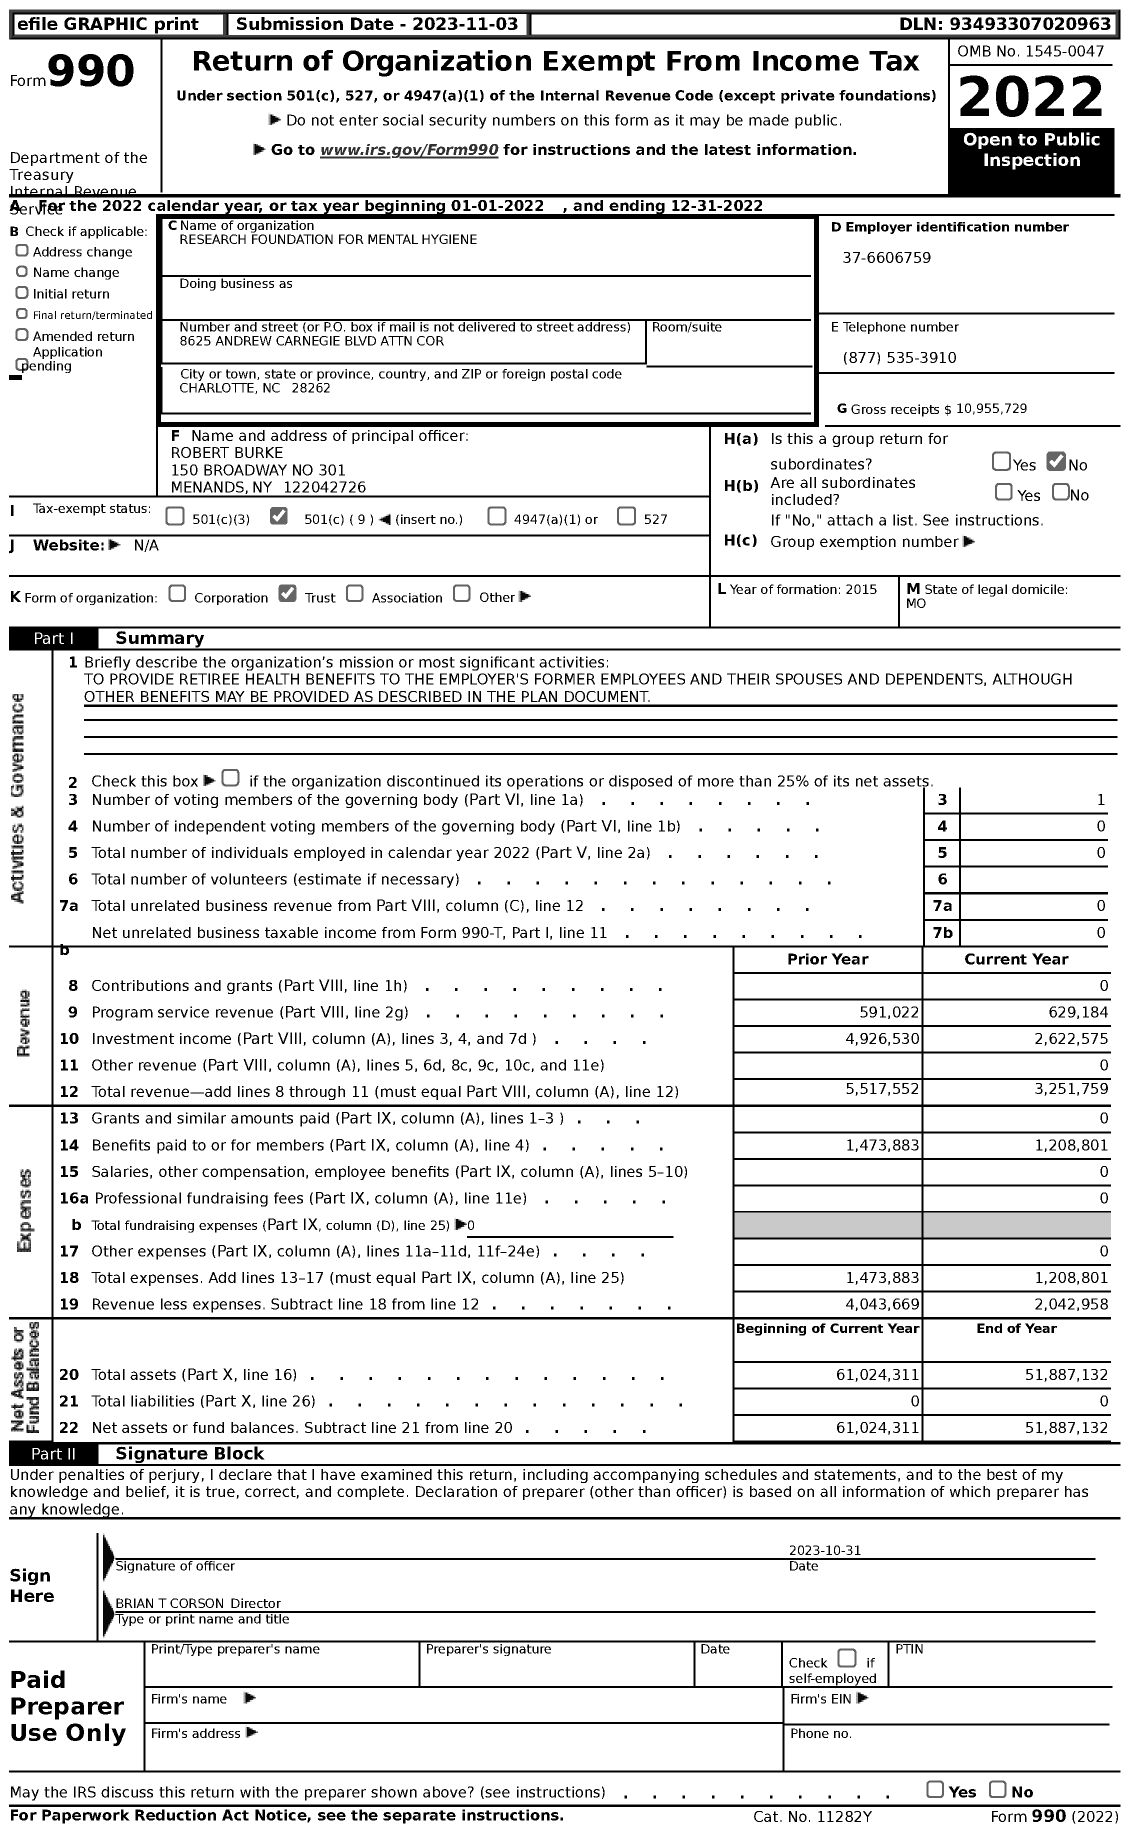 Image of first page of 2022 Form 990 for Research Foundation for Mental Hygiene / Tiaa-Cref TR Company FSB Ttee